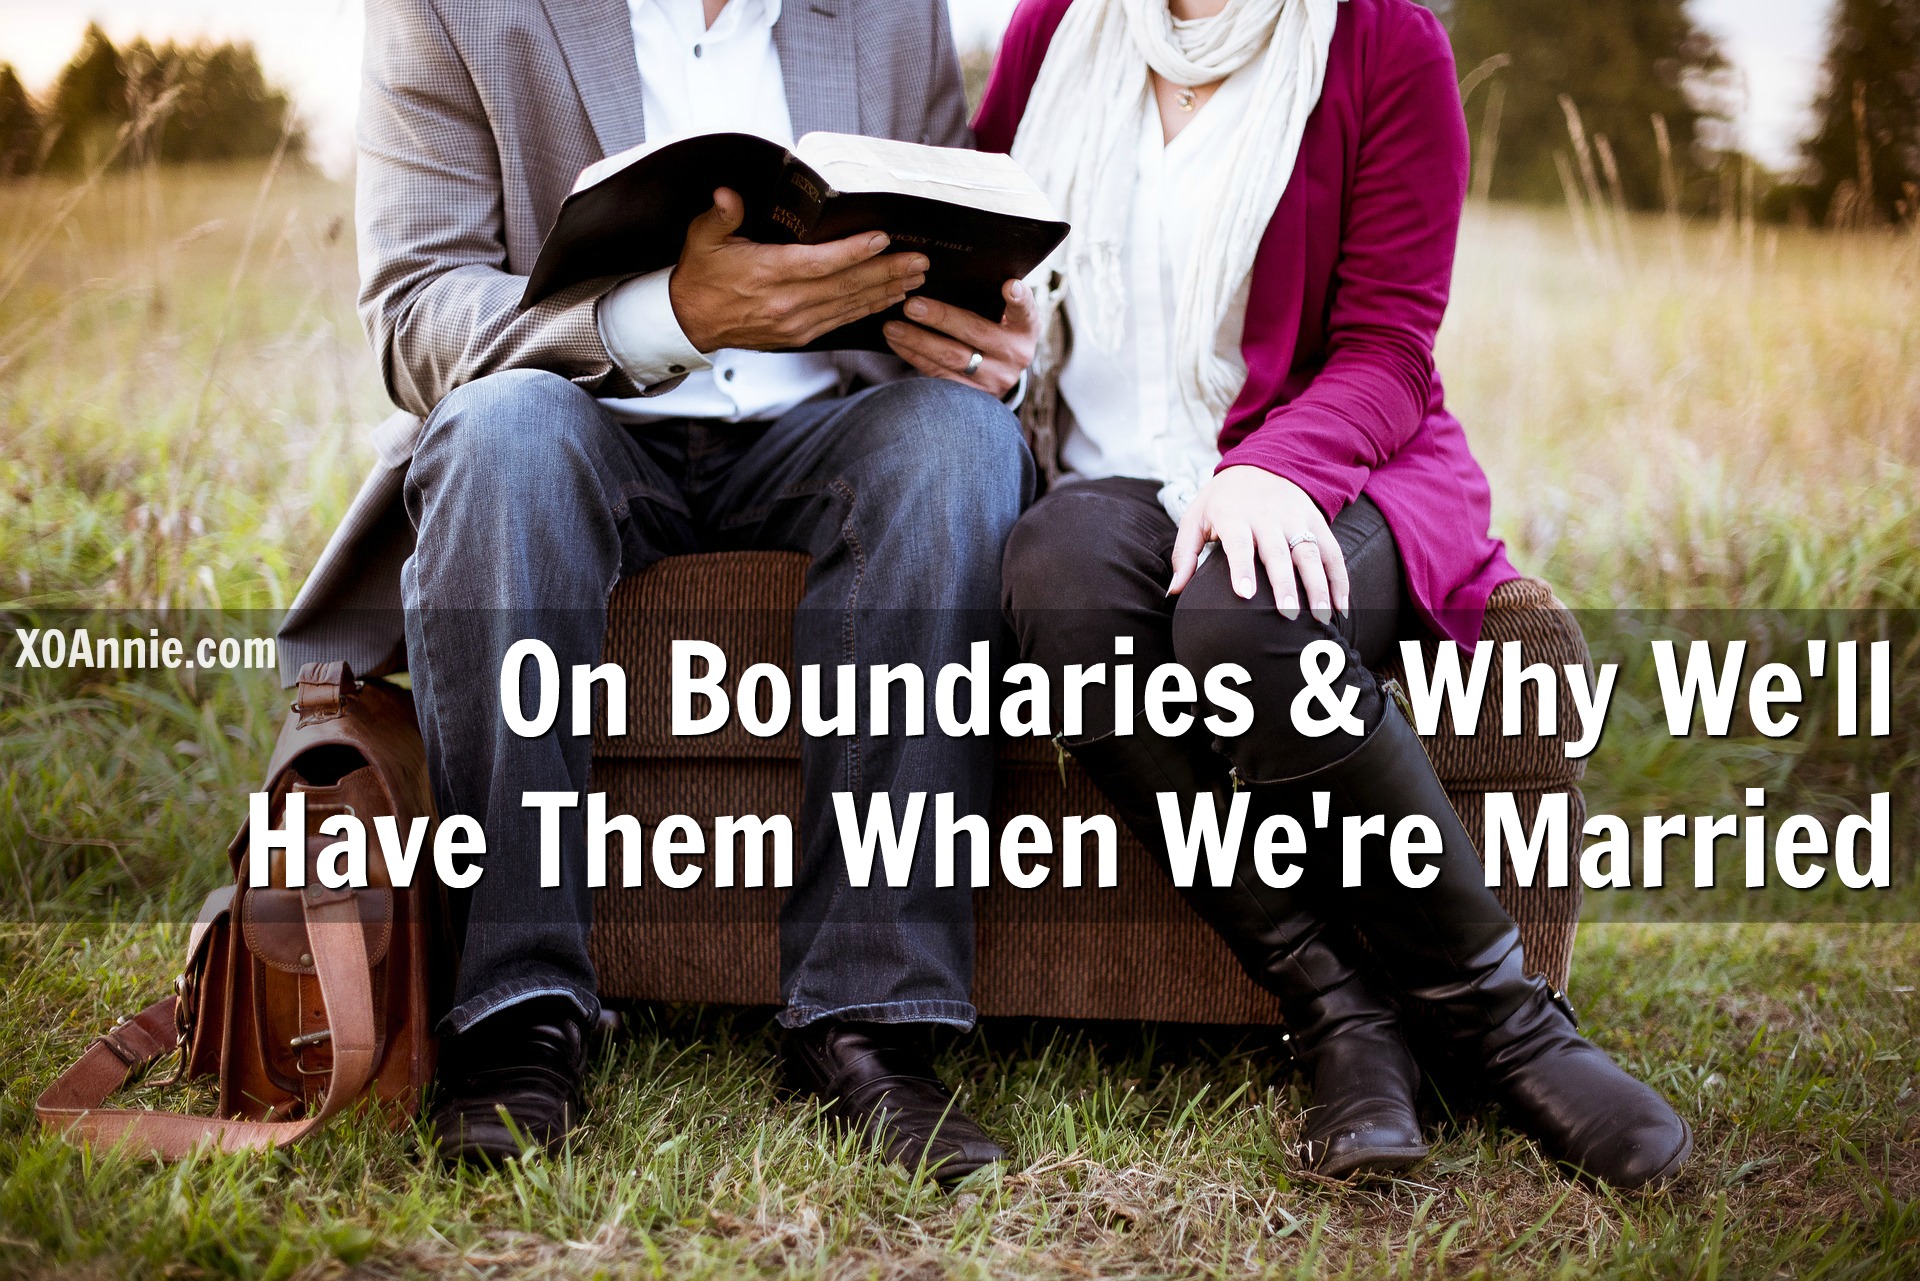 On Boundaries & Why We’ll Have Them When We’re Married